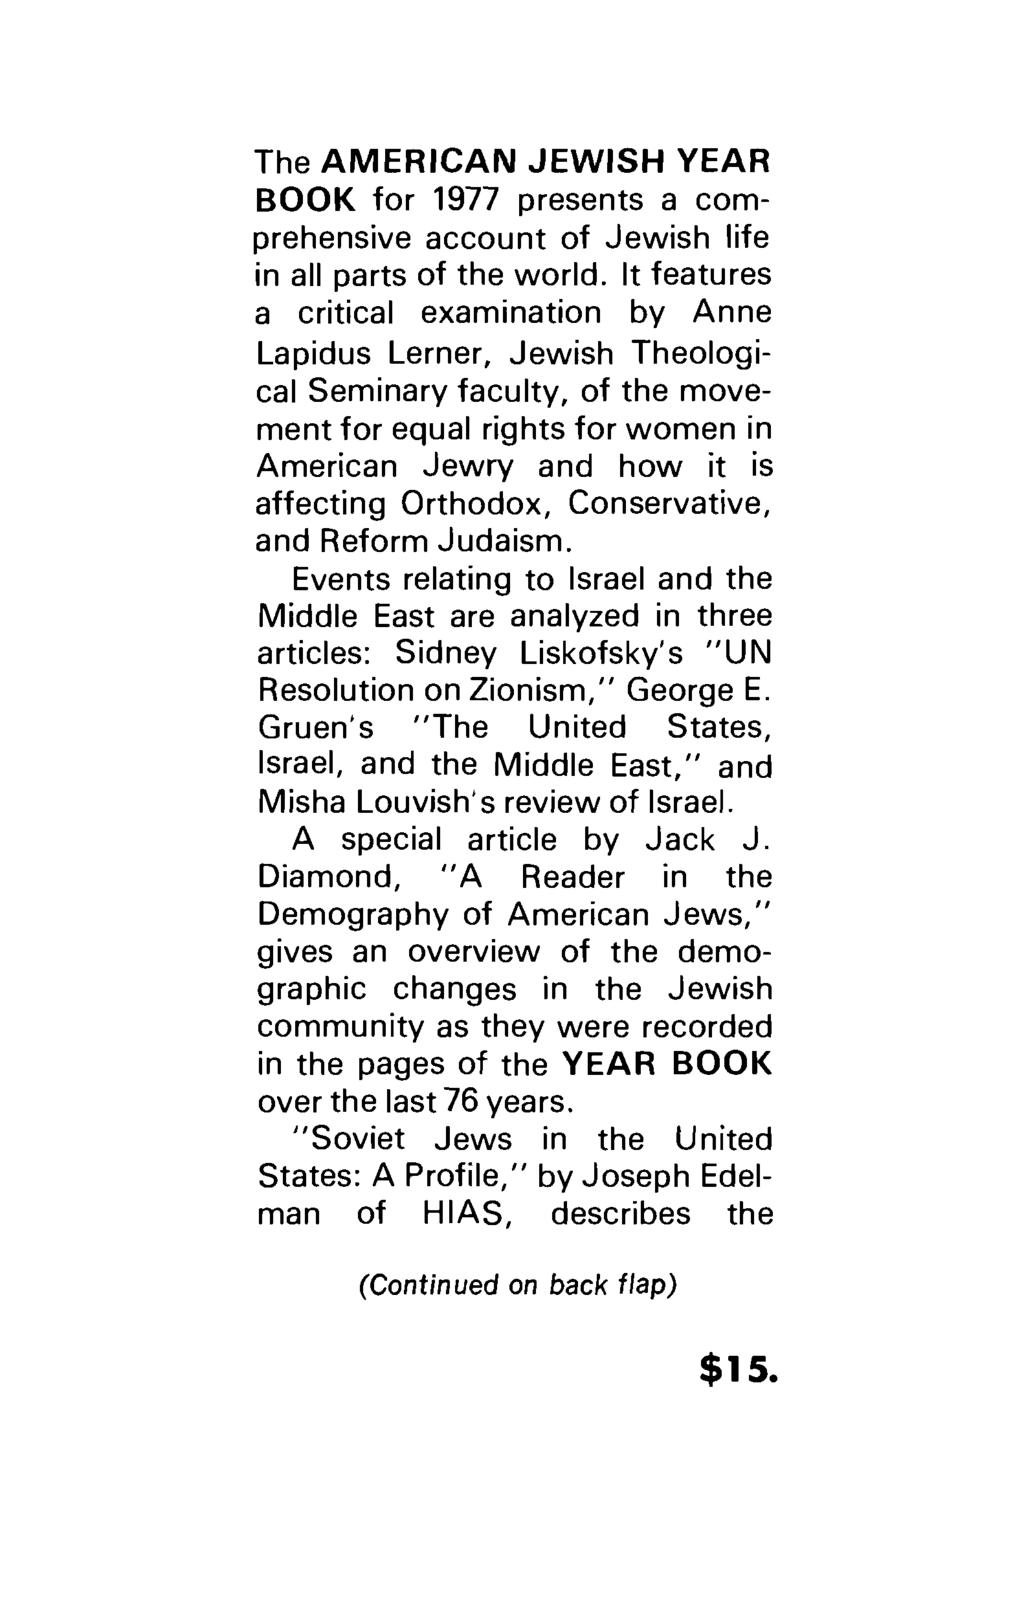 The AMERICAN JEWISH YEAR BOOK for 1977 presents a comprehensive account of Jewish life in all parts of the world.